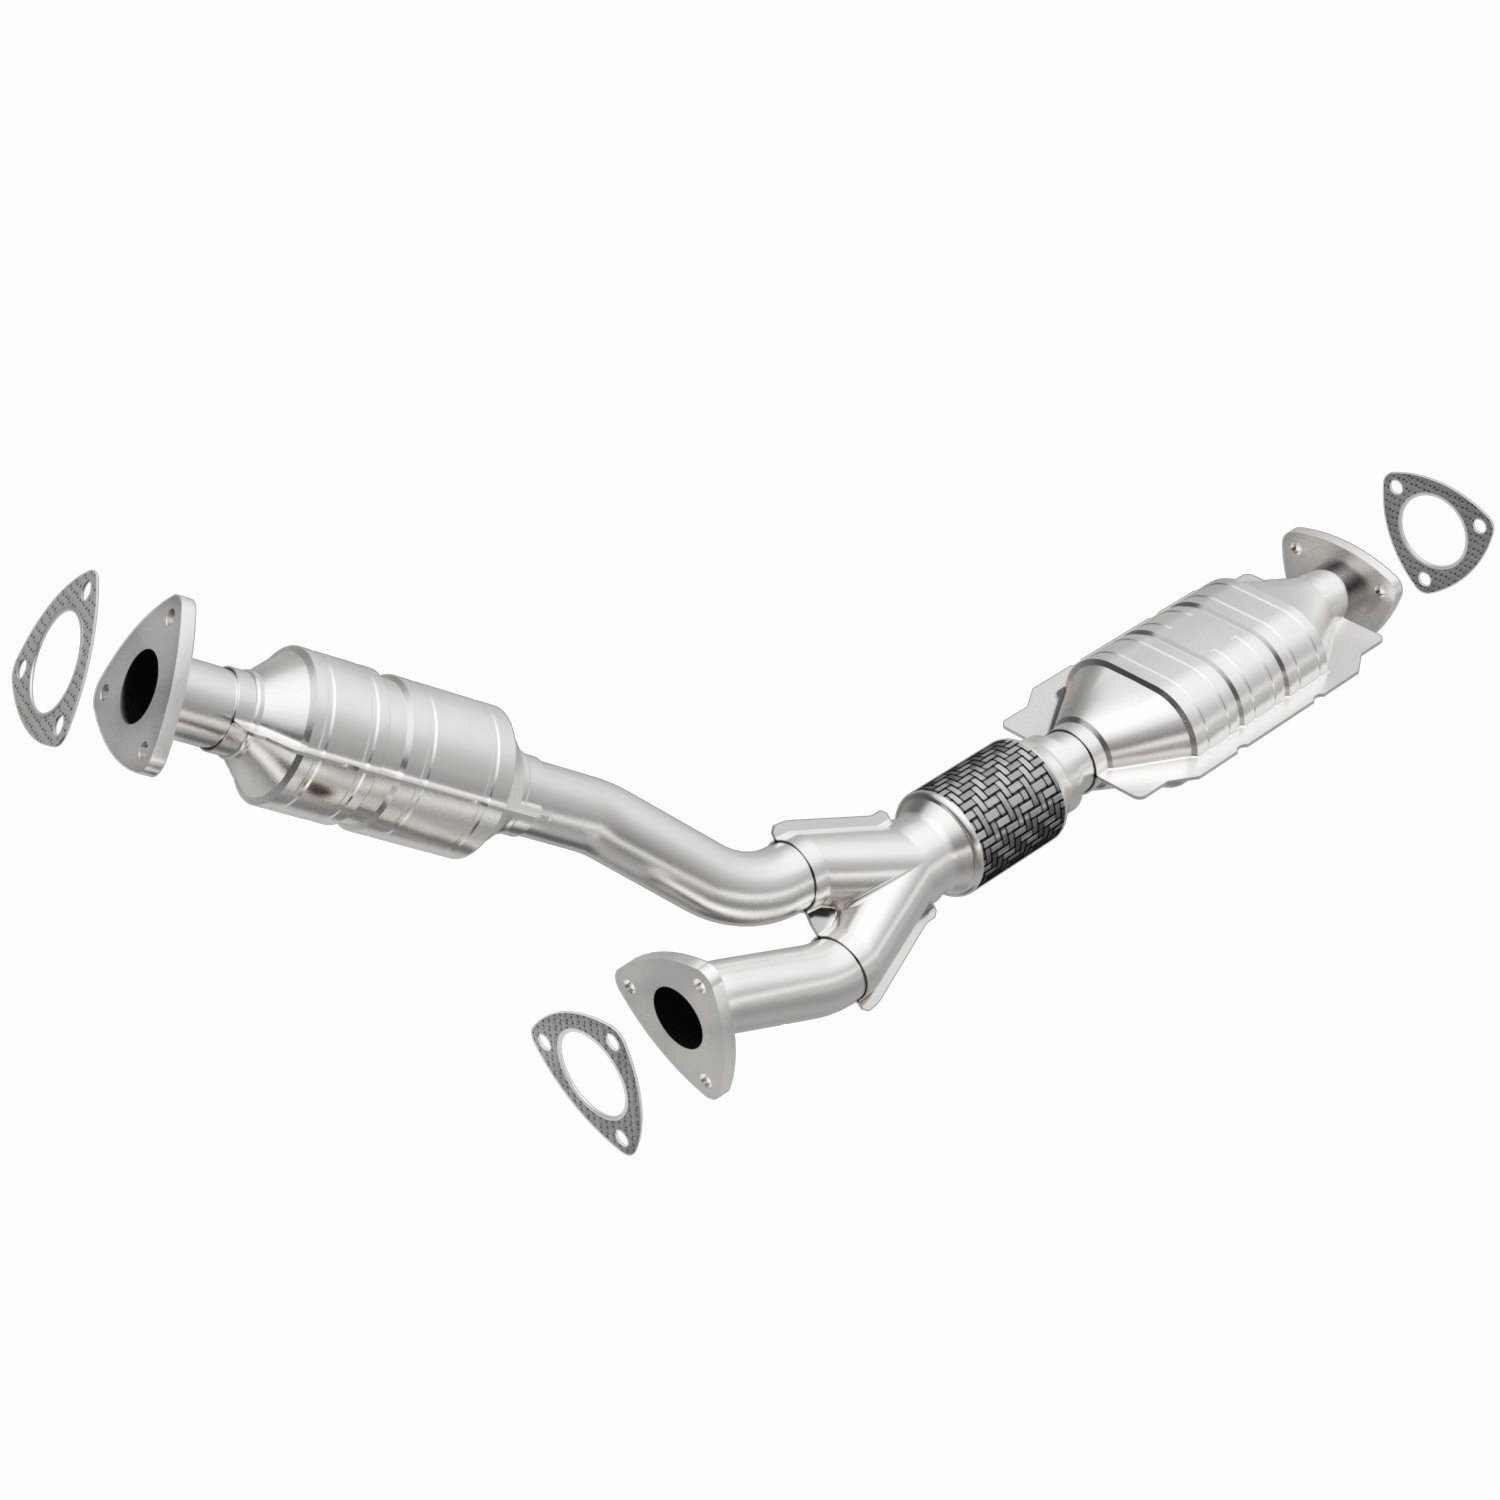 HM Grade Federal / EPA Compliant Direct-Fit Catalytic Converter 24410